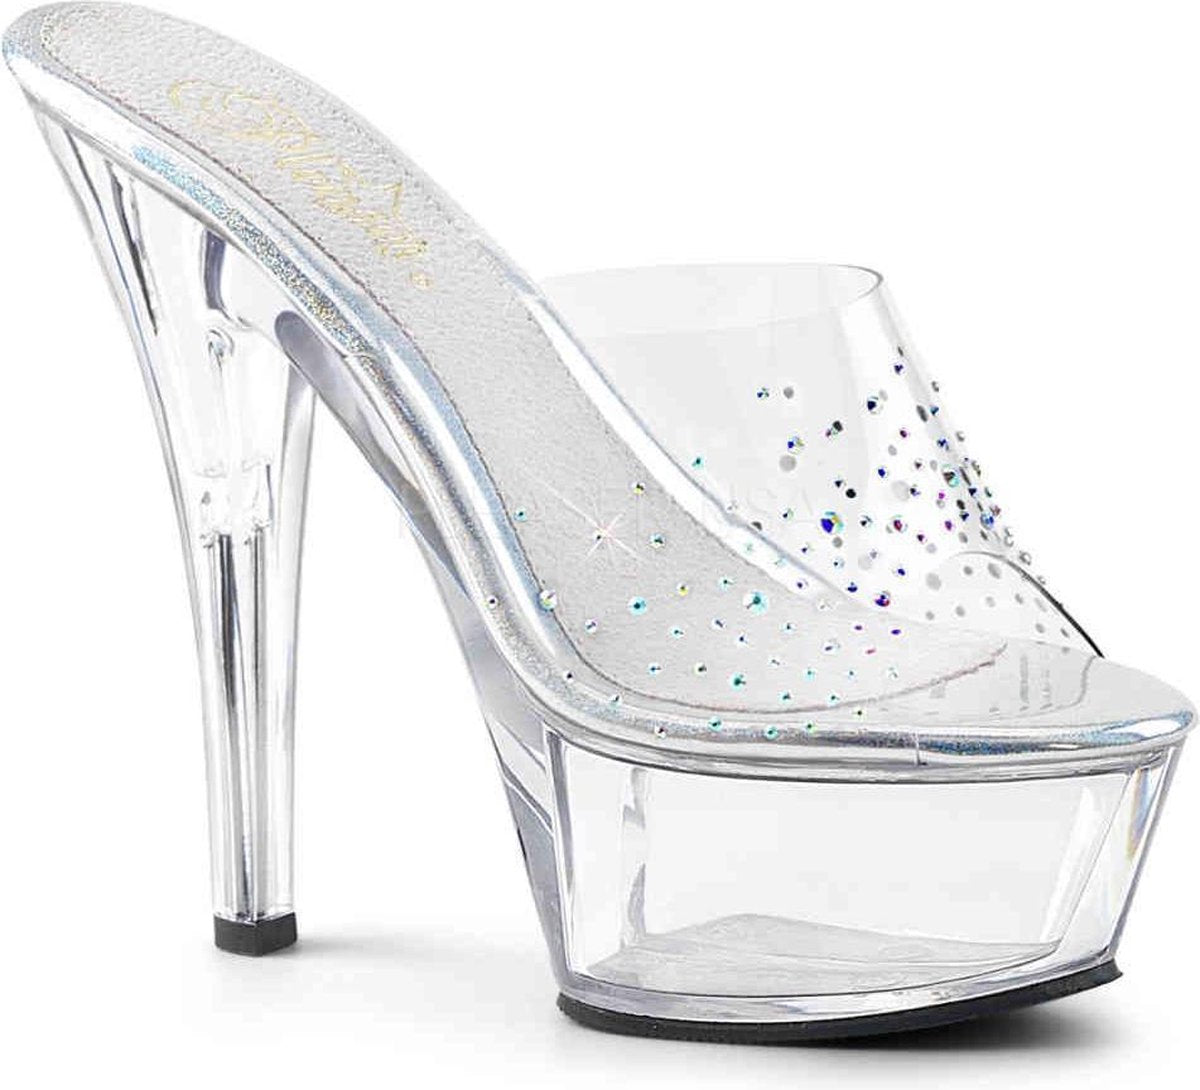 PLEASER KISS-201SD CLEAR STARDUST TOP 6 INCH HIGH HEEL PLATFORM SHOES SIZE 7 USA